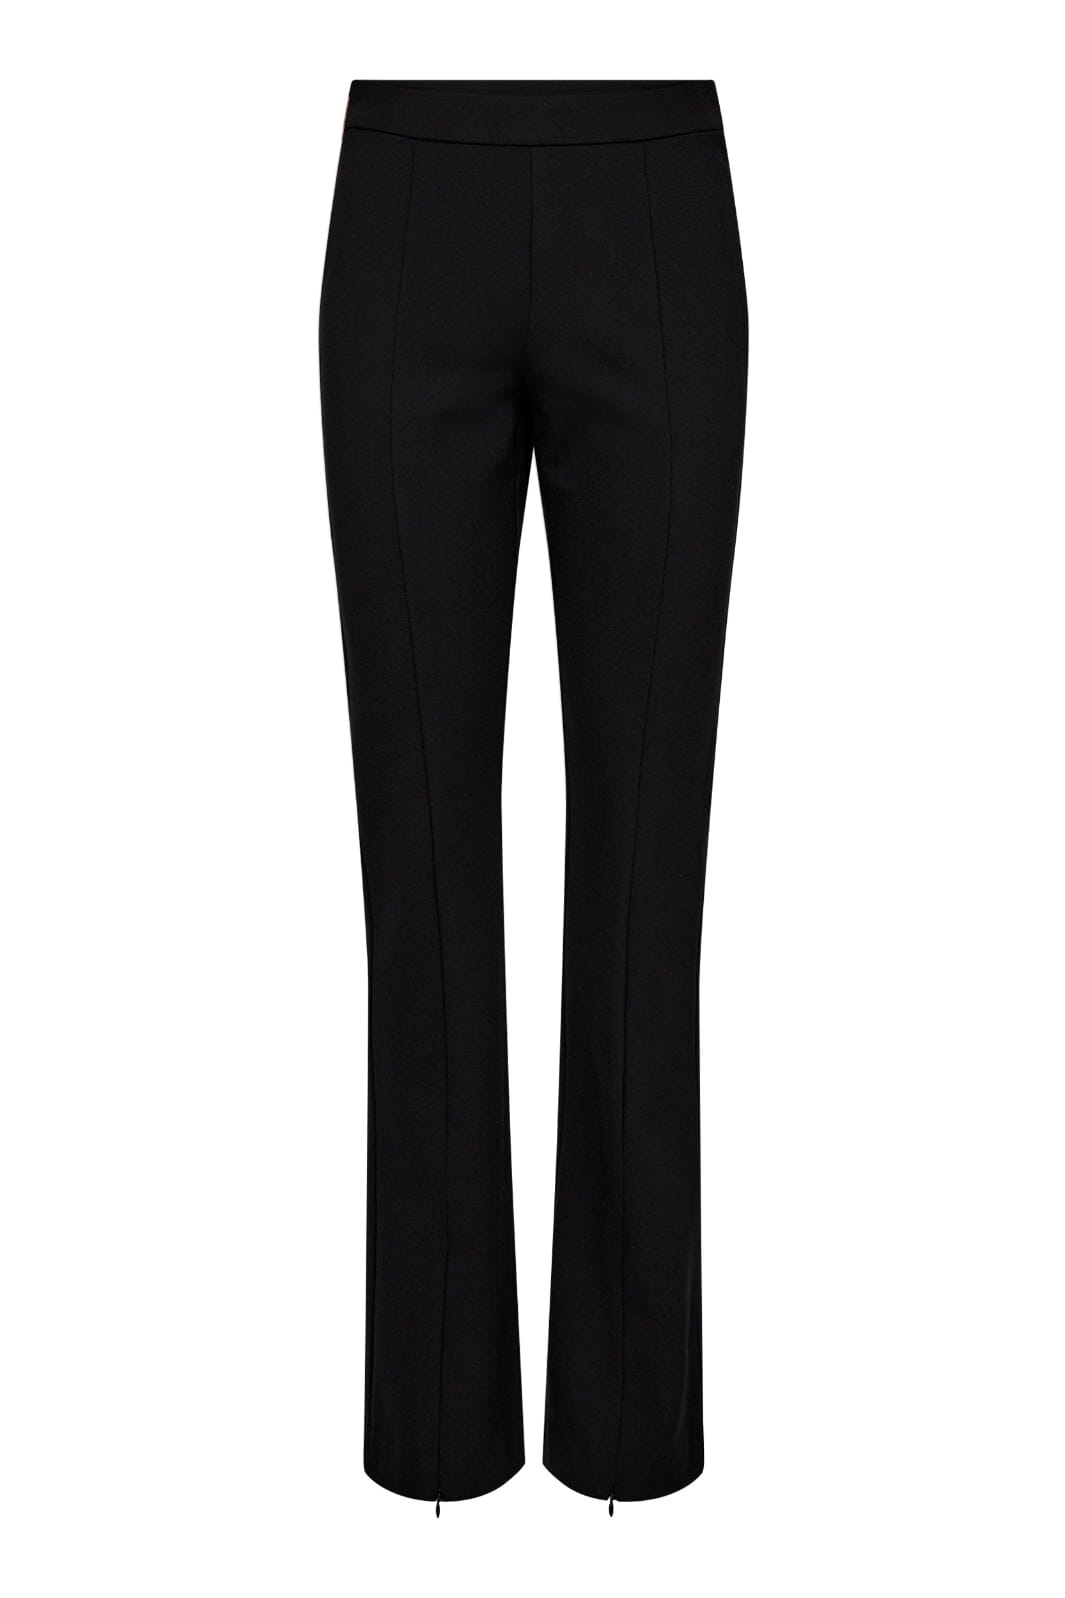 Co´couture - Stacycc Flare Pant - 96 Black Bukser 